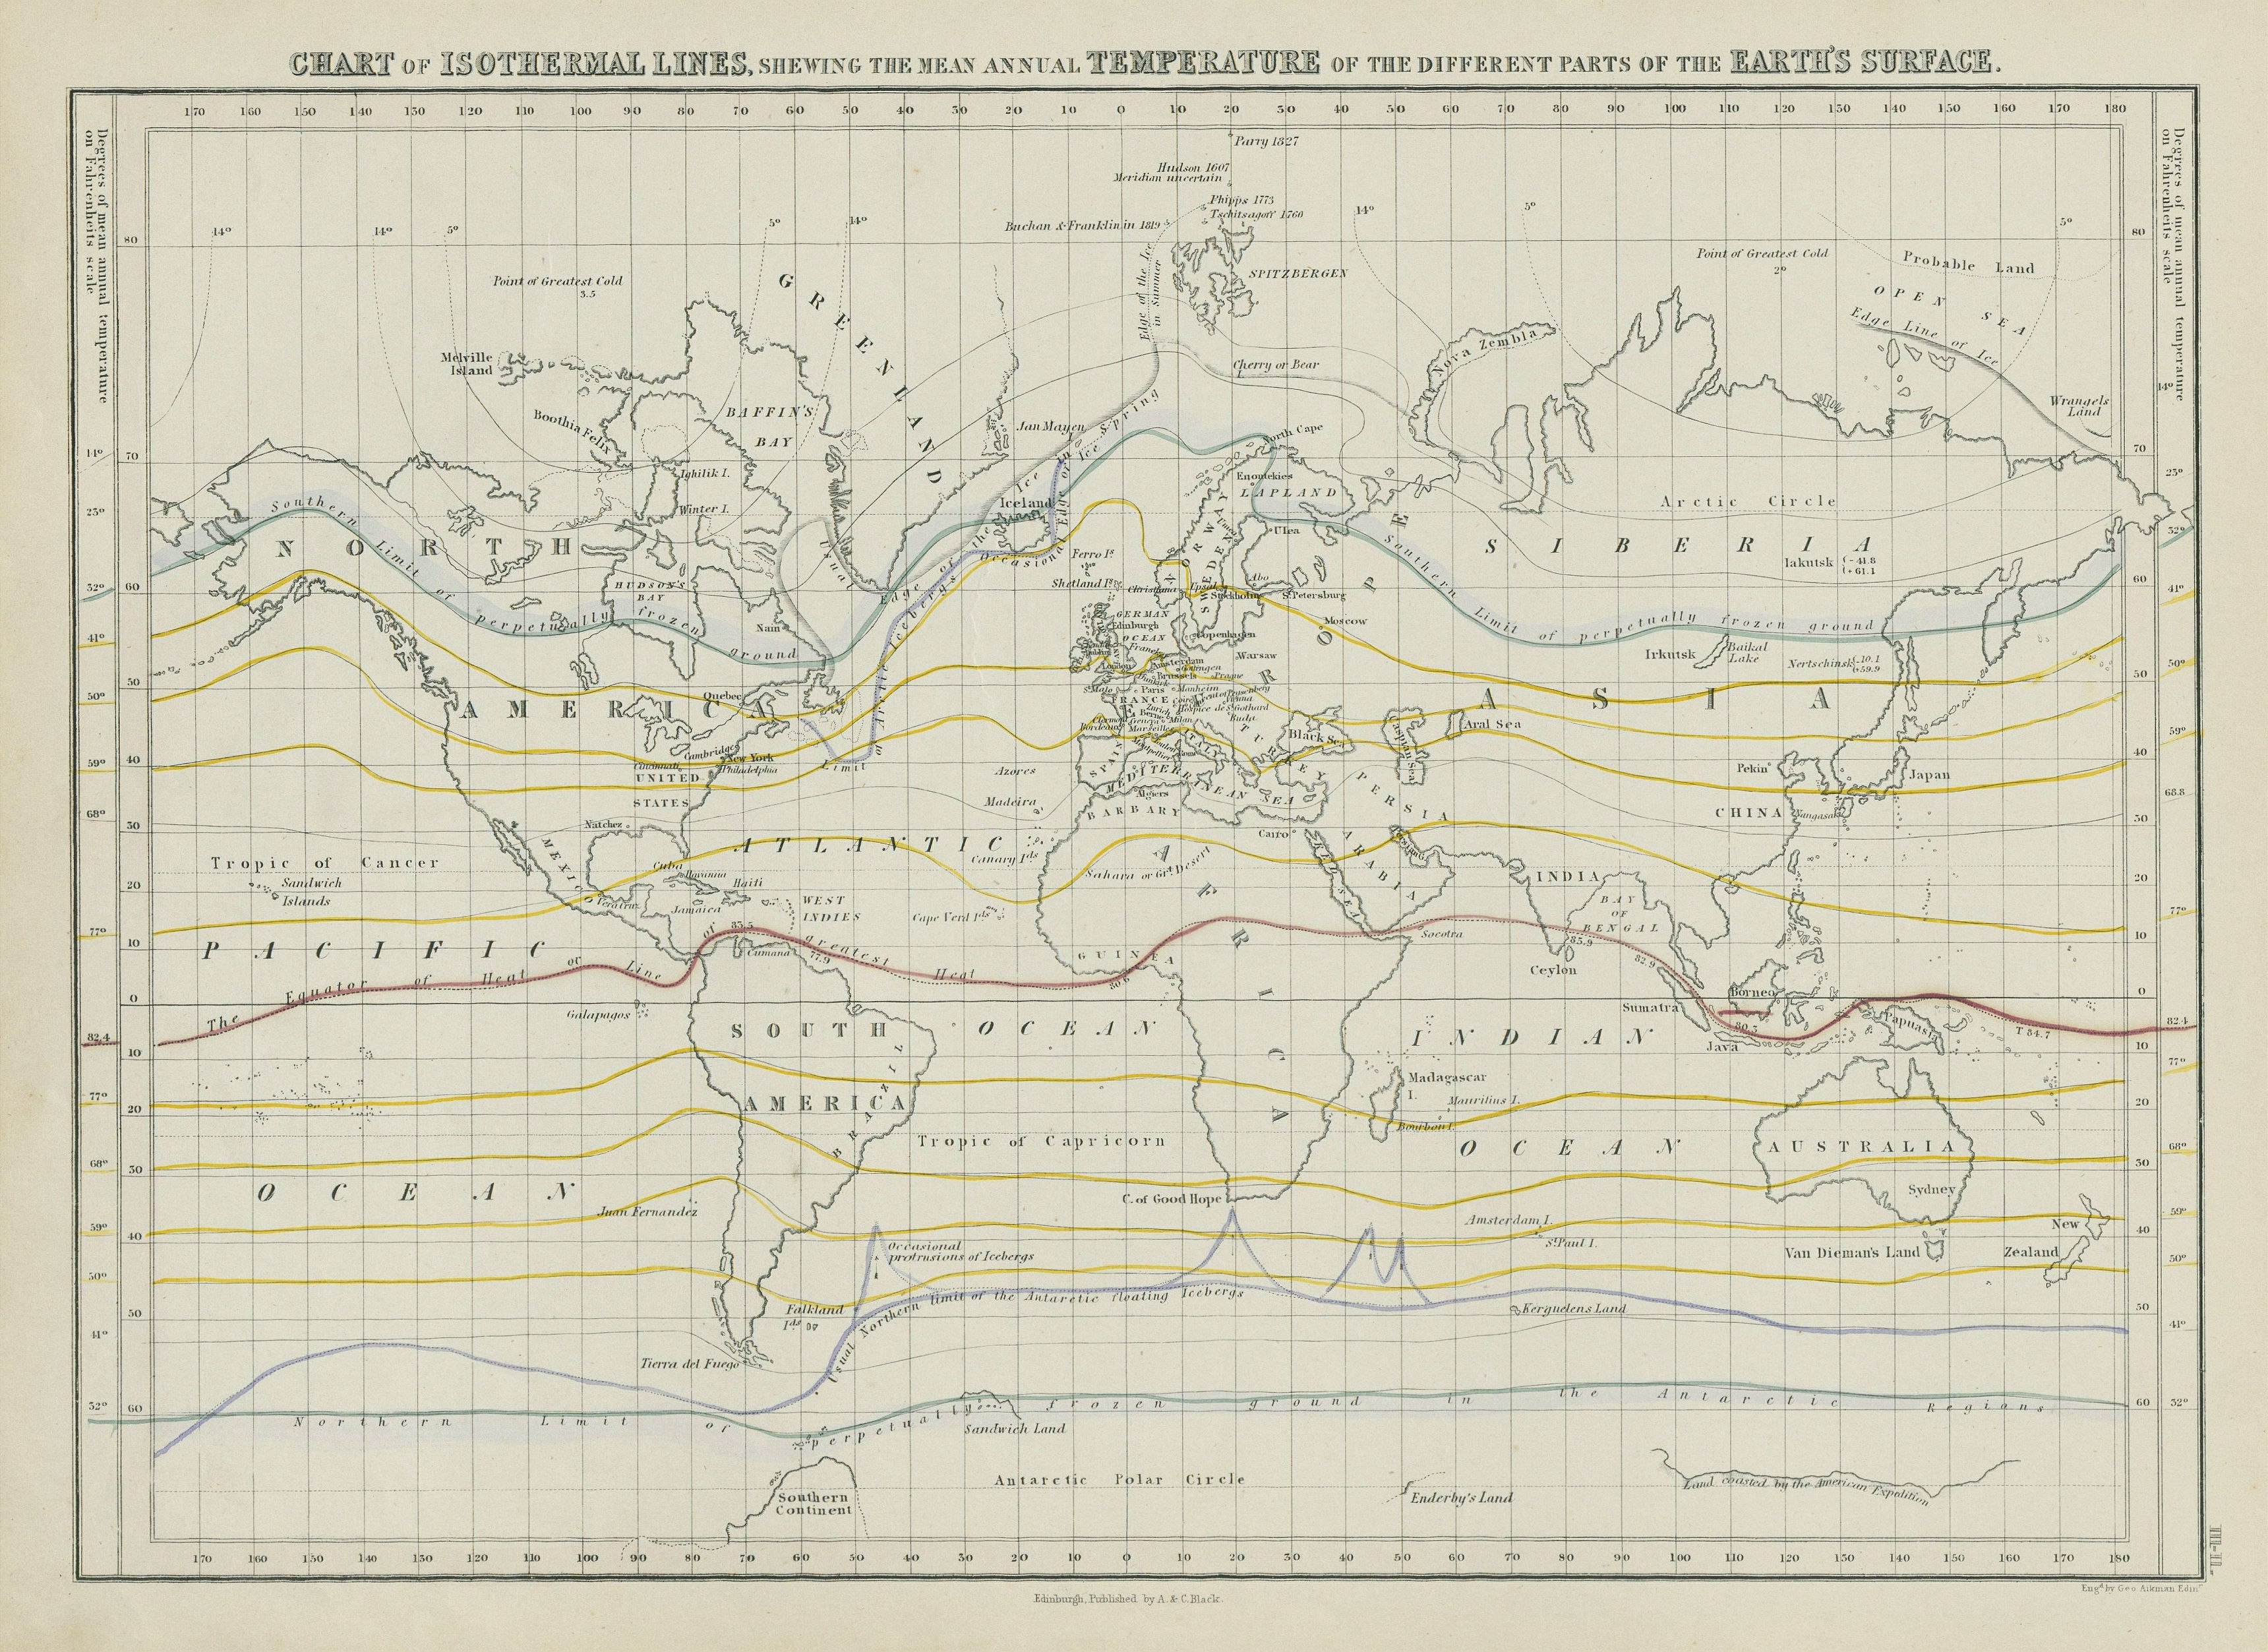 Associate Product World chart of isothermal lines. Mean annual temperature. GEORGE AIKMAN 1856 map